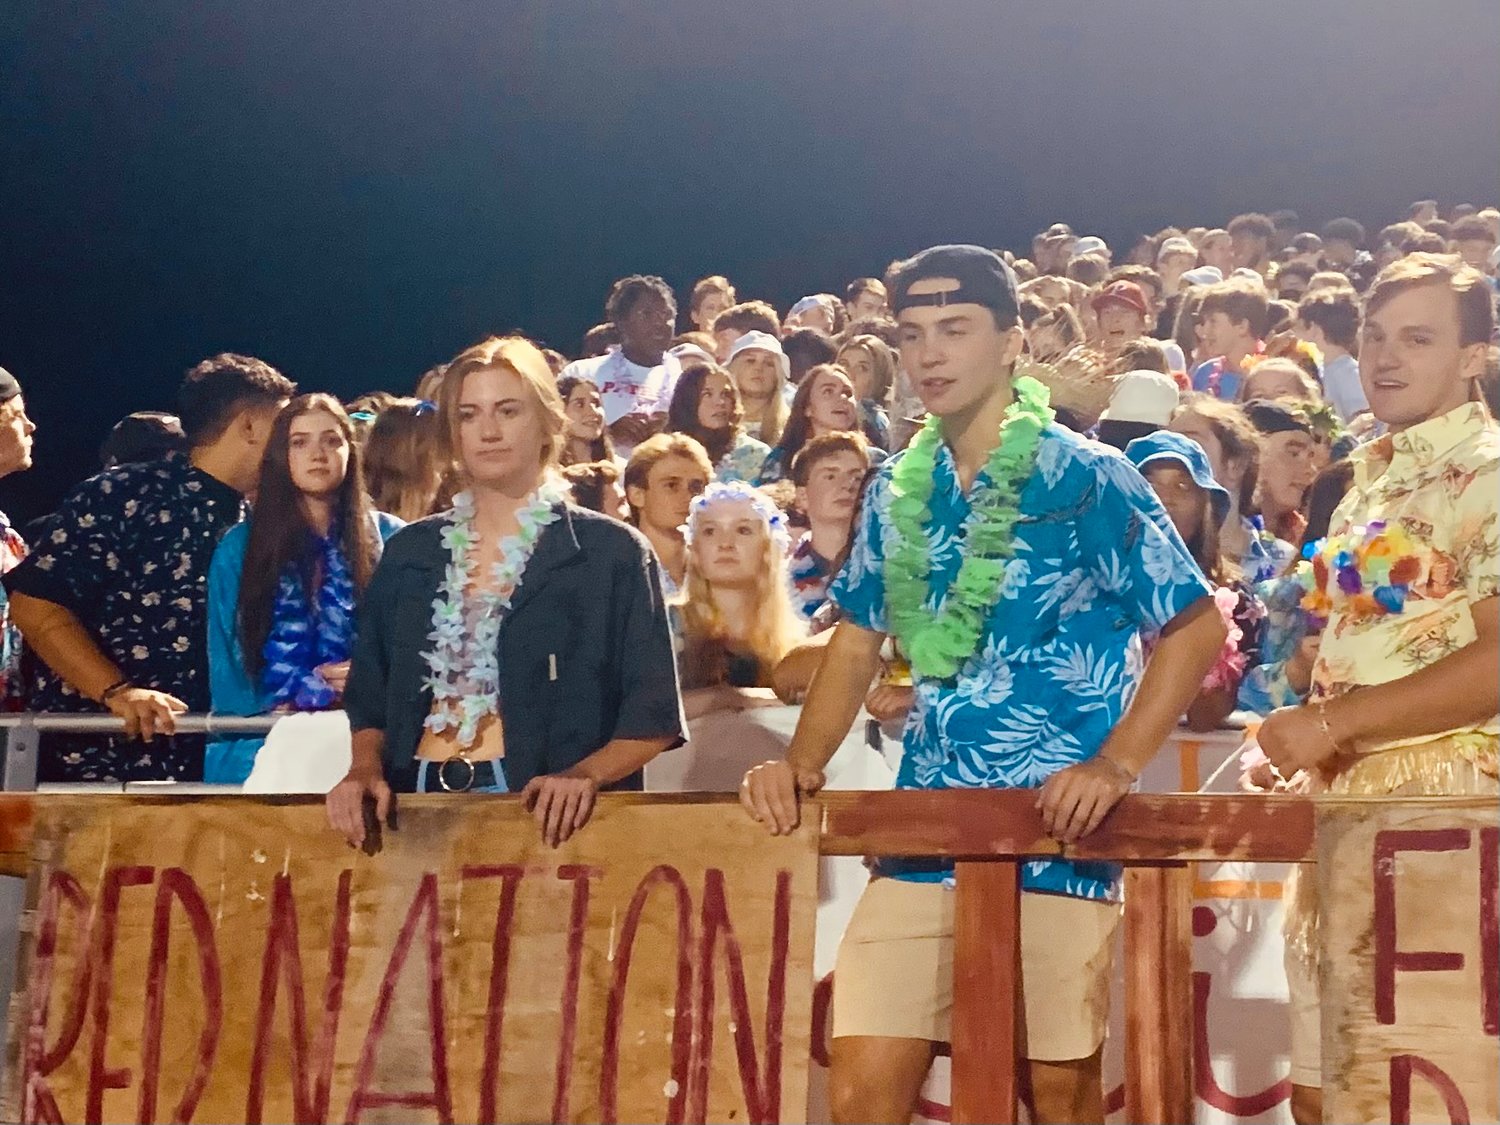 Current Patriot High School students and alumni join "Red Nation" cheering on the Patriots at their 10 year celebration game. The theme of the night was Hawaiian or tropical dress.